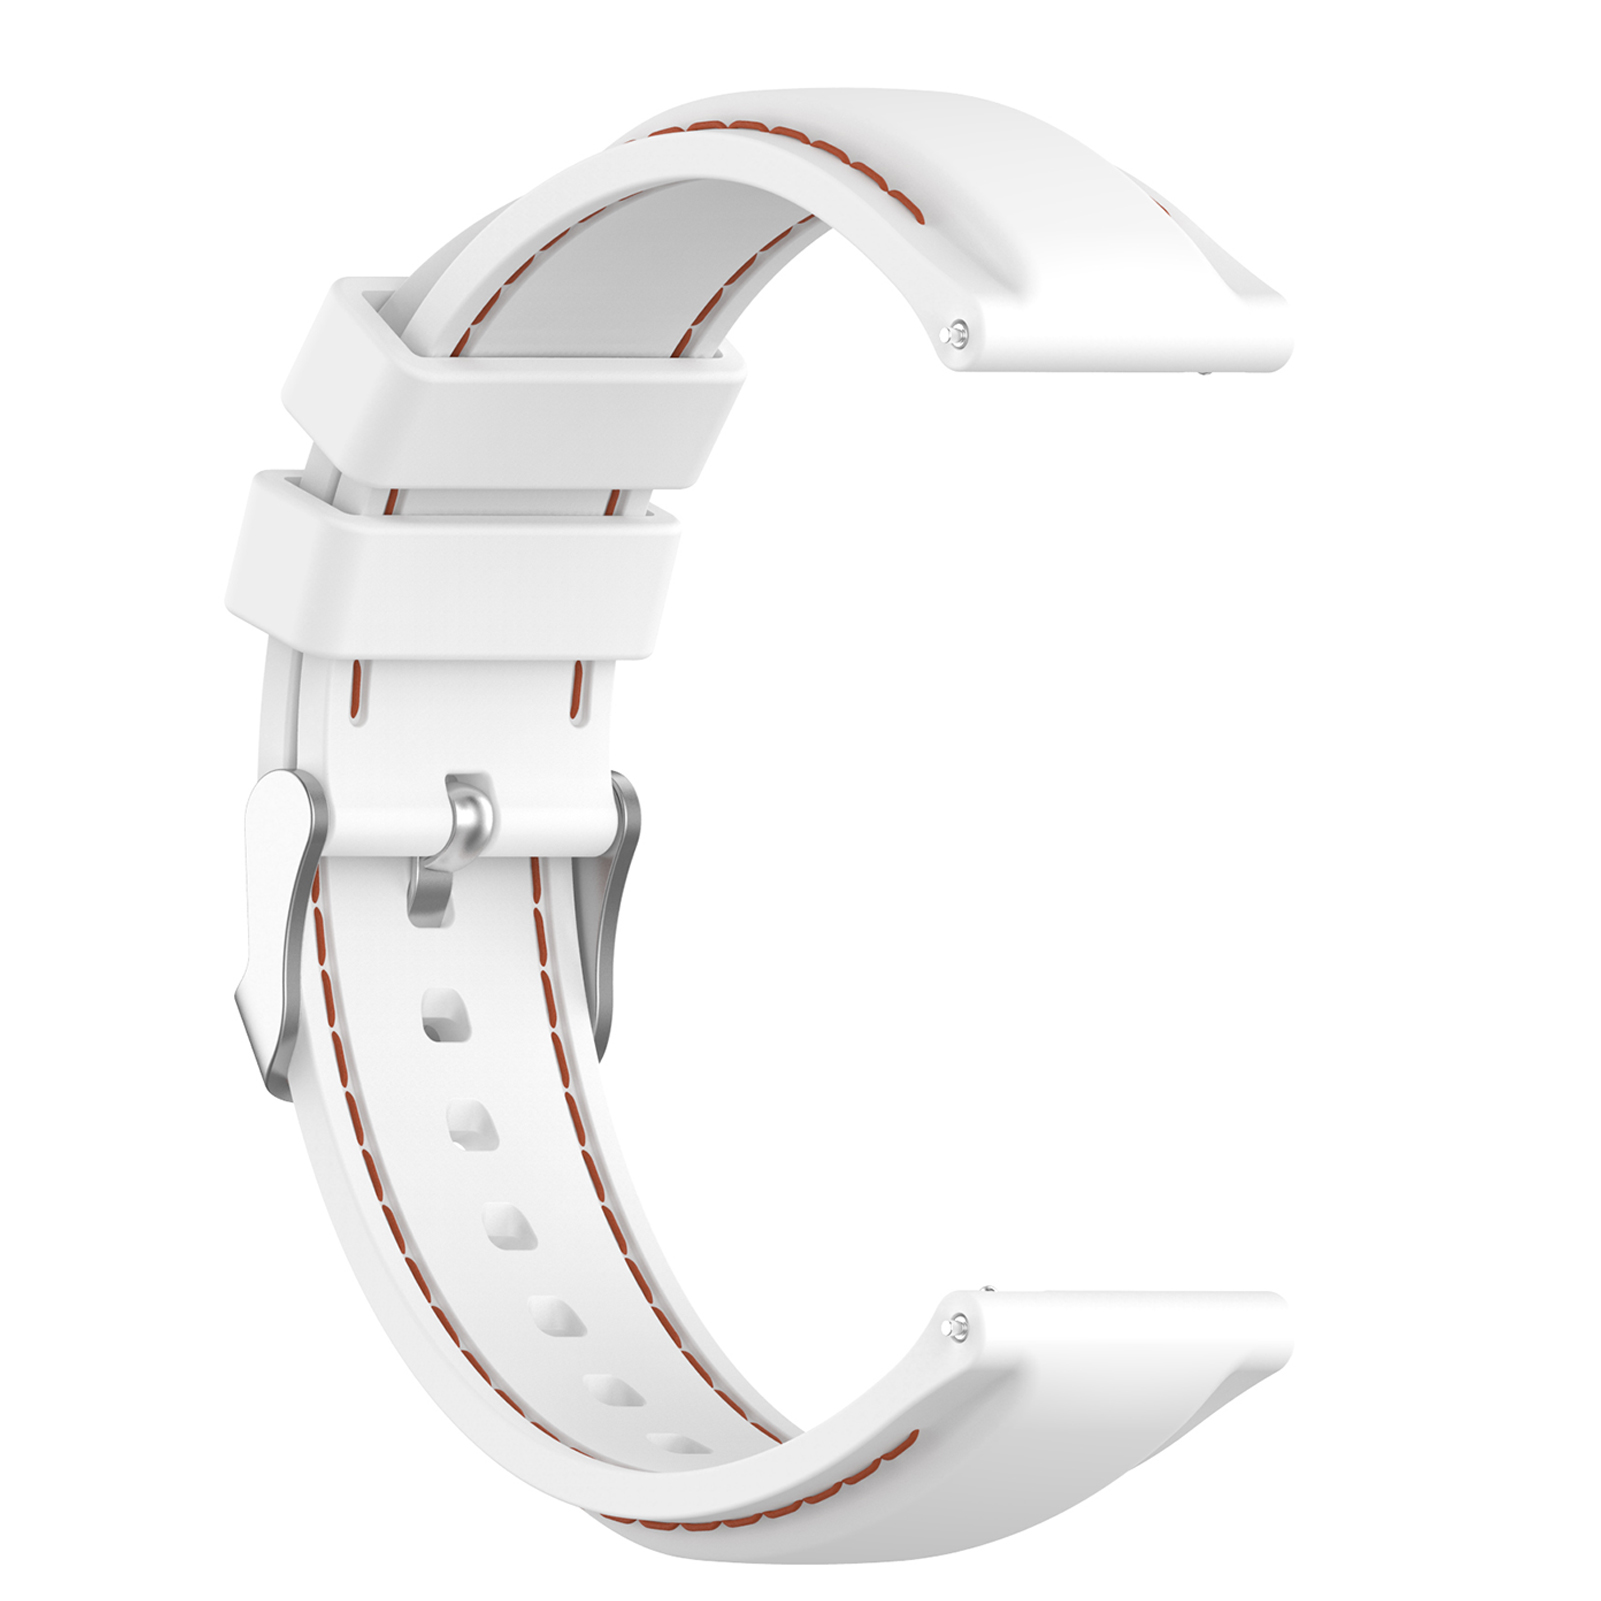 22mm-Soft-Silicone-Watch-Strap-Band-Replacement-Sport-Bracelet-Watchband-For-Ticwatch-Pro3LTE-Haylou-1809083-6